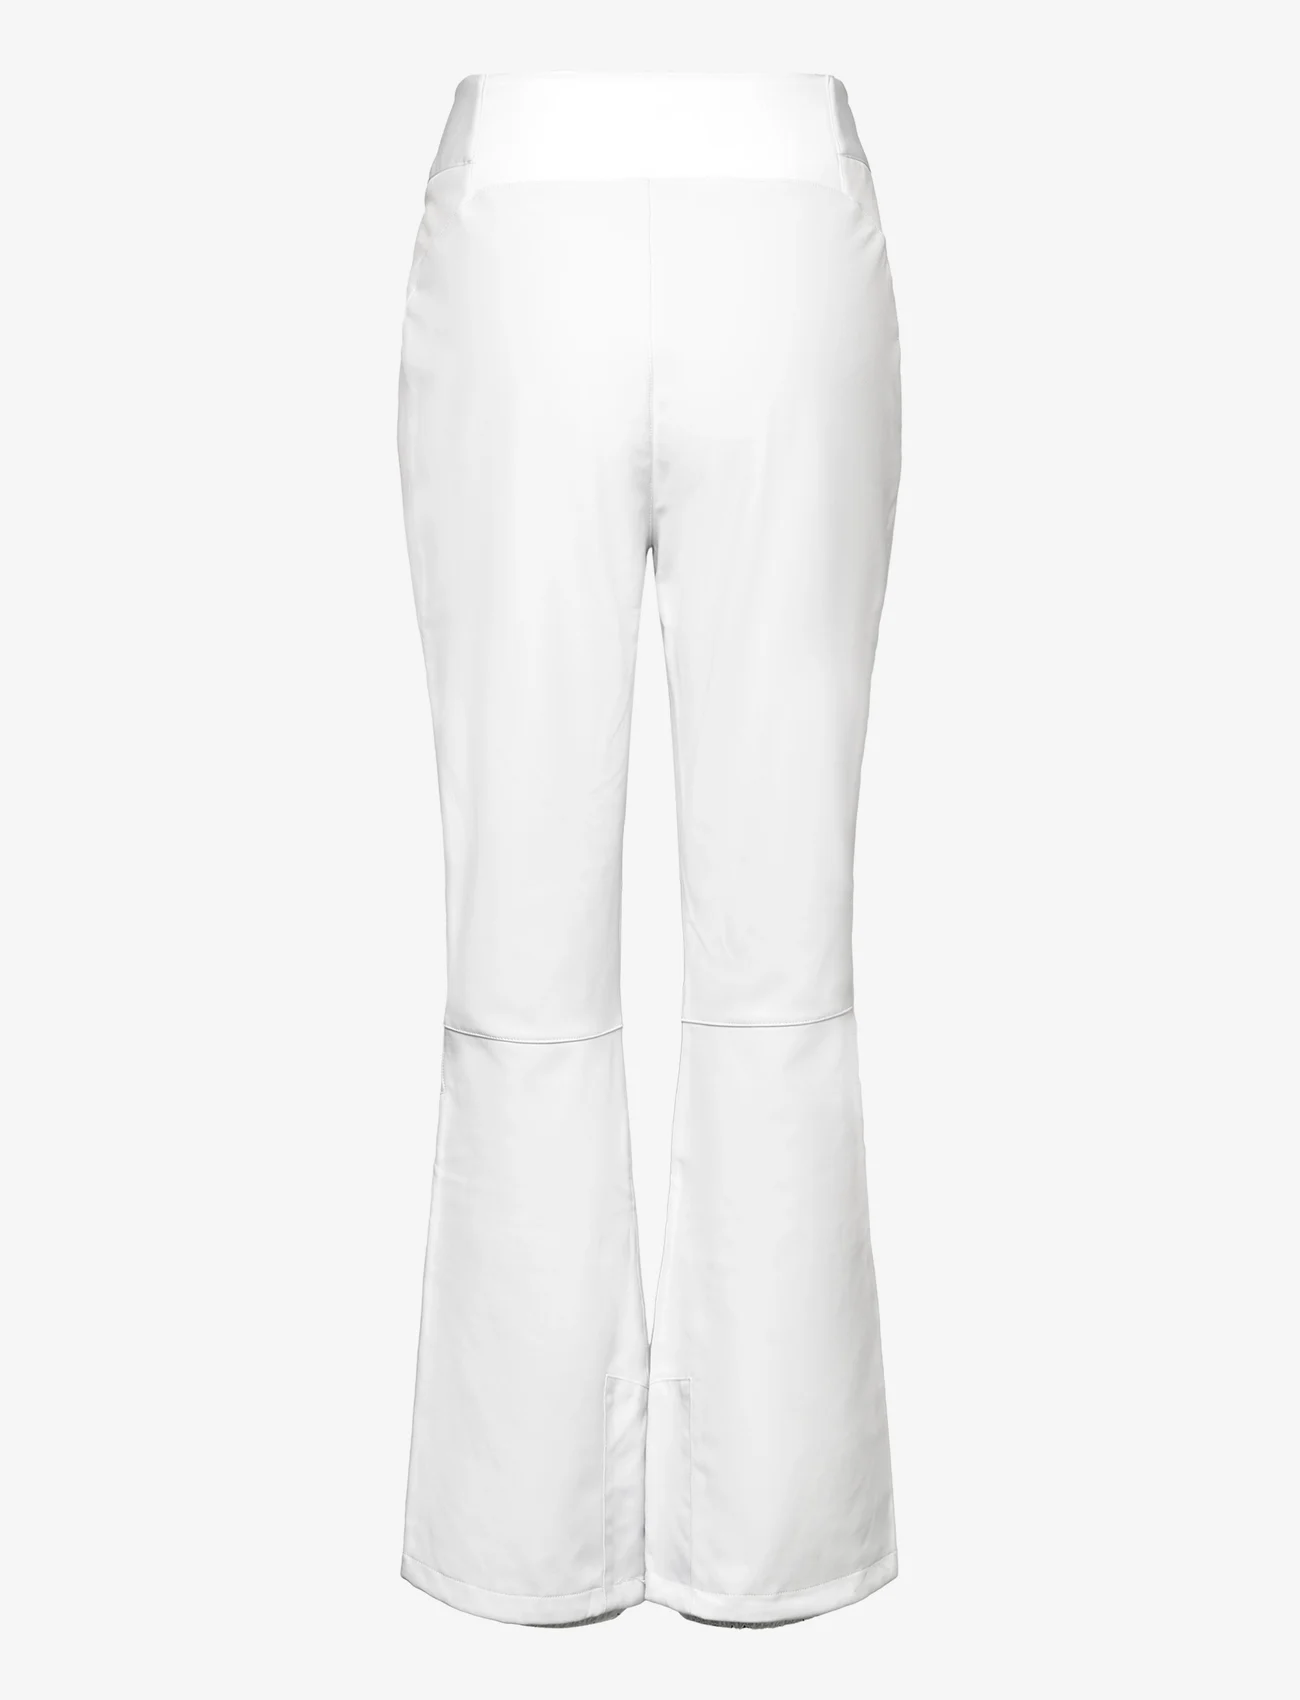 AIM'N - Stretch Thermo Pants - white - 1